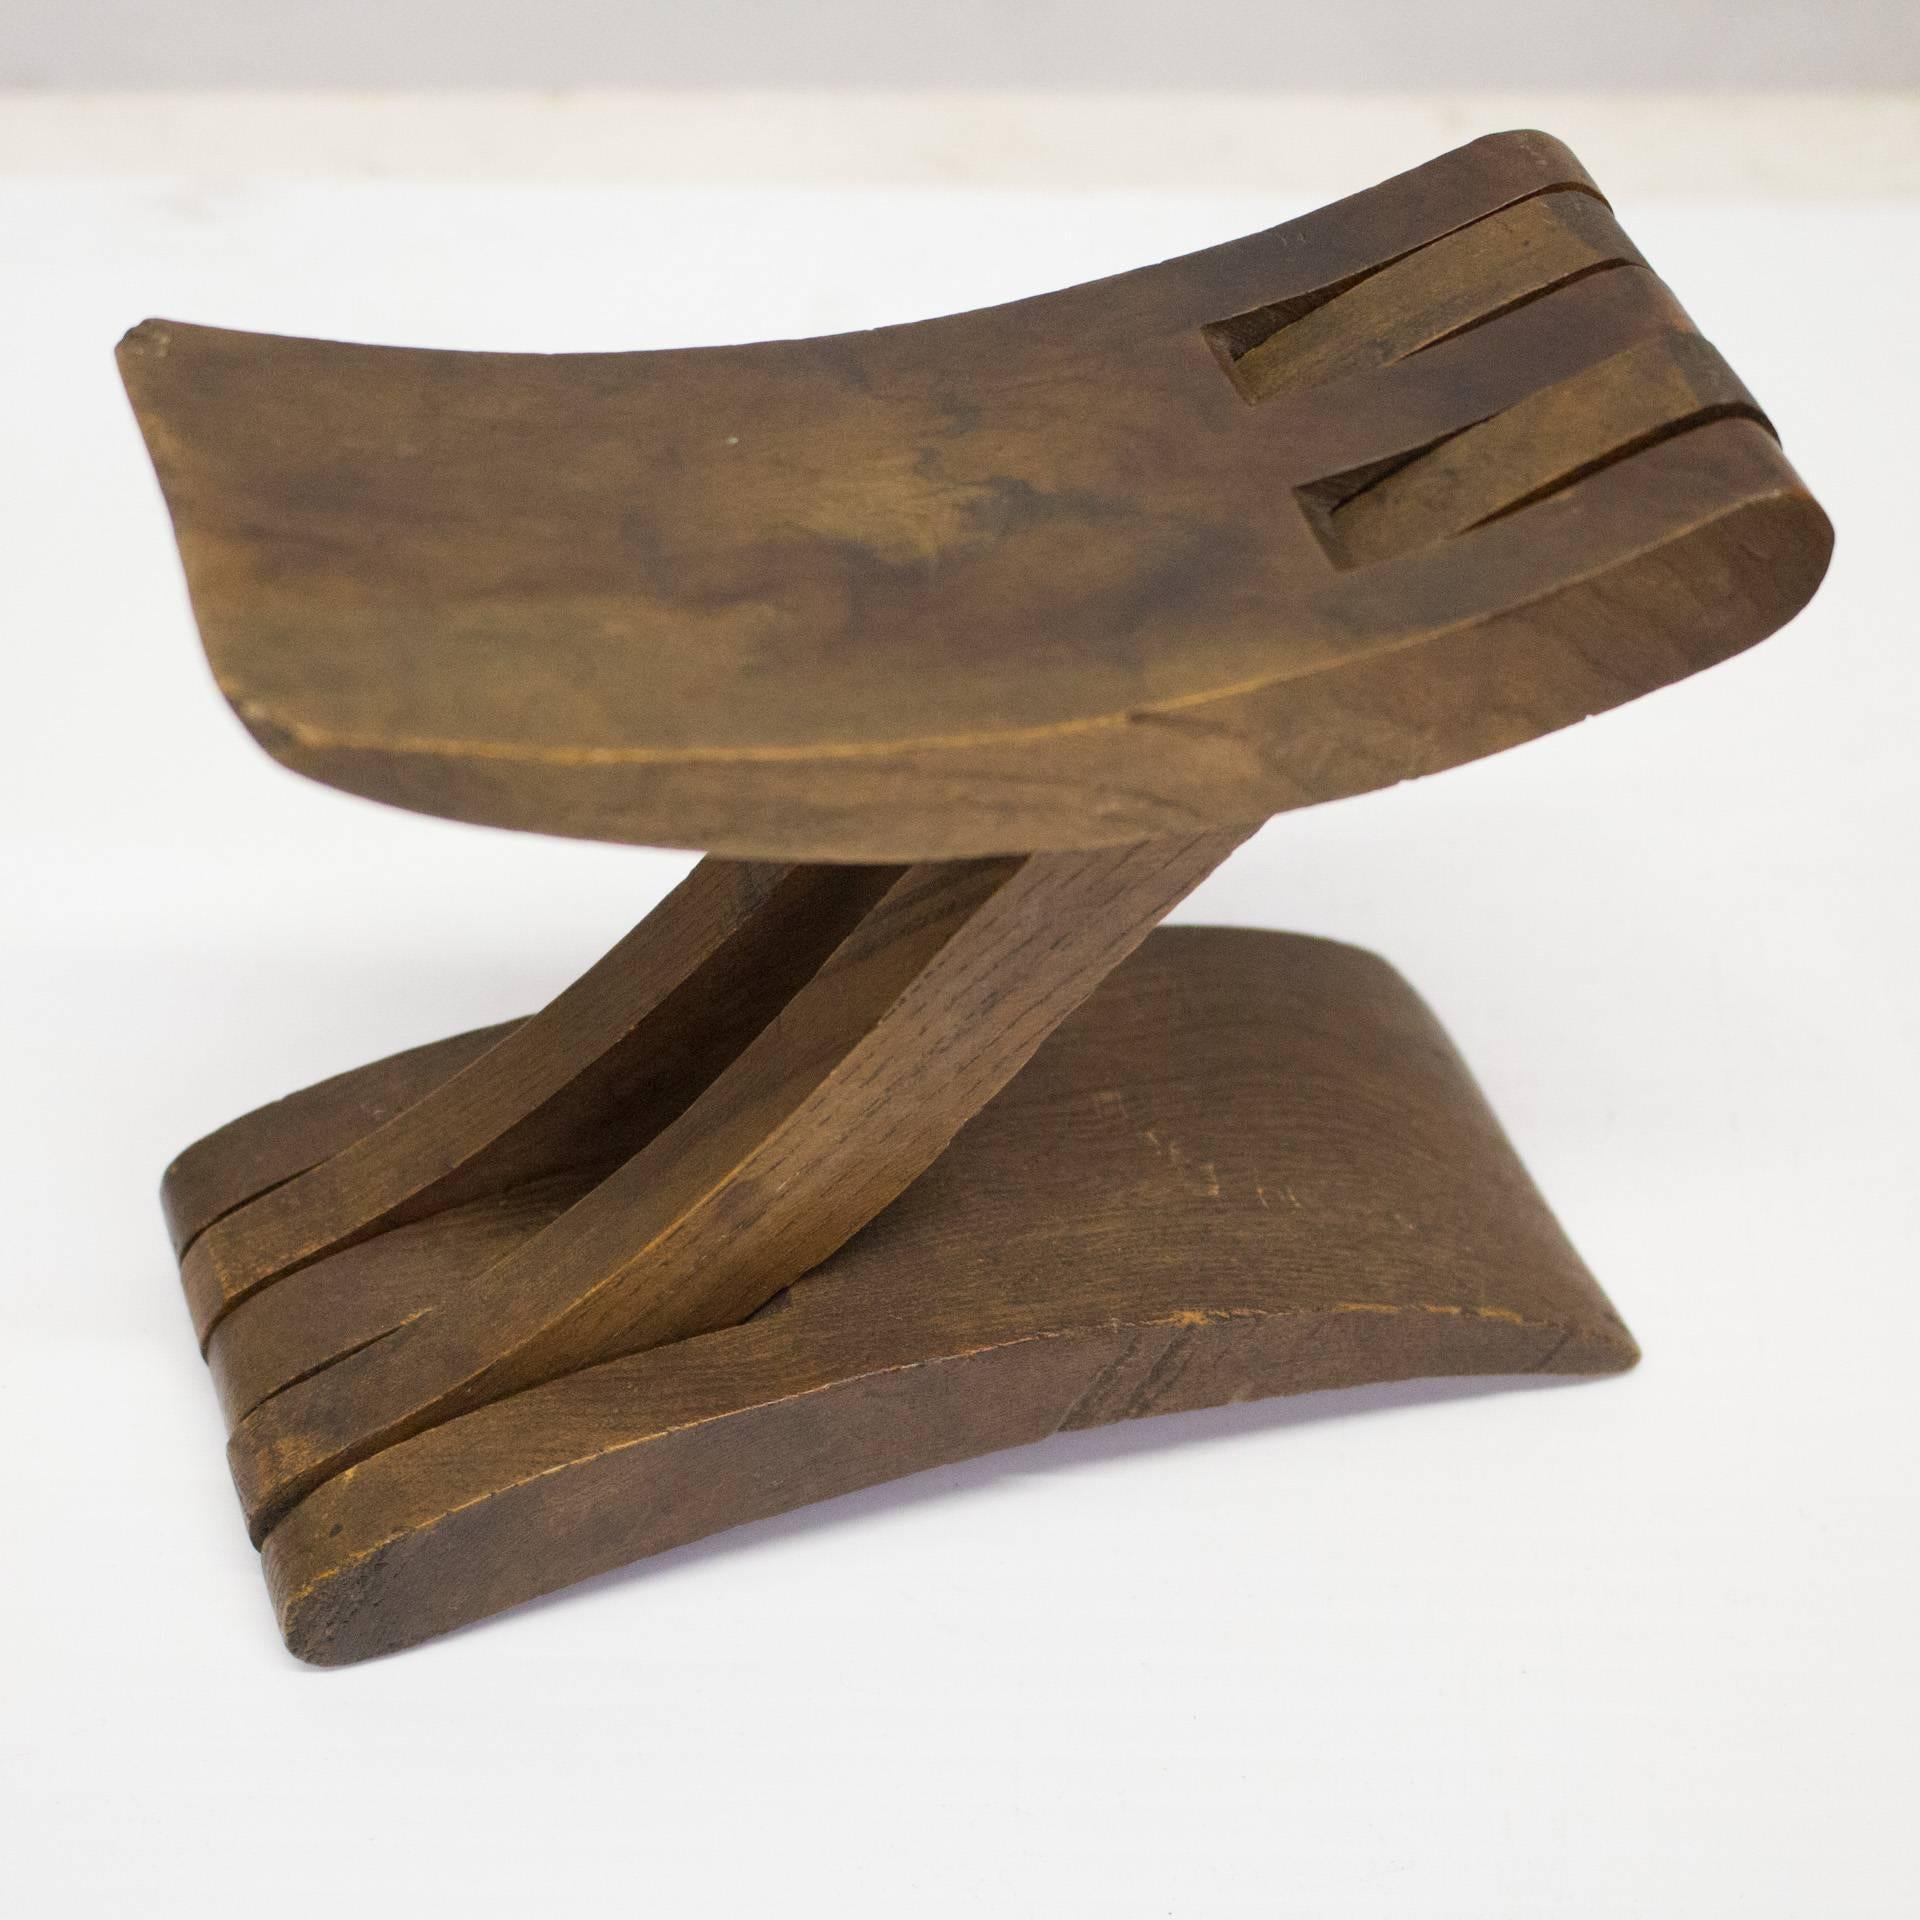 An authentic African headrest. These traditional hand-carved pieces were personal accessories. Types of woods used and designs vary by region and culture. This is an excellent specimen.